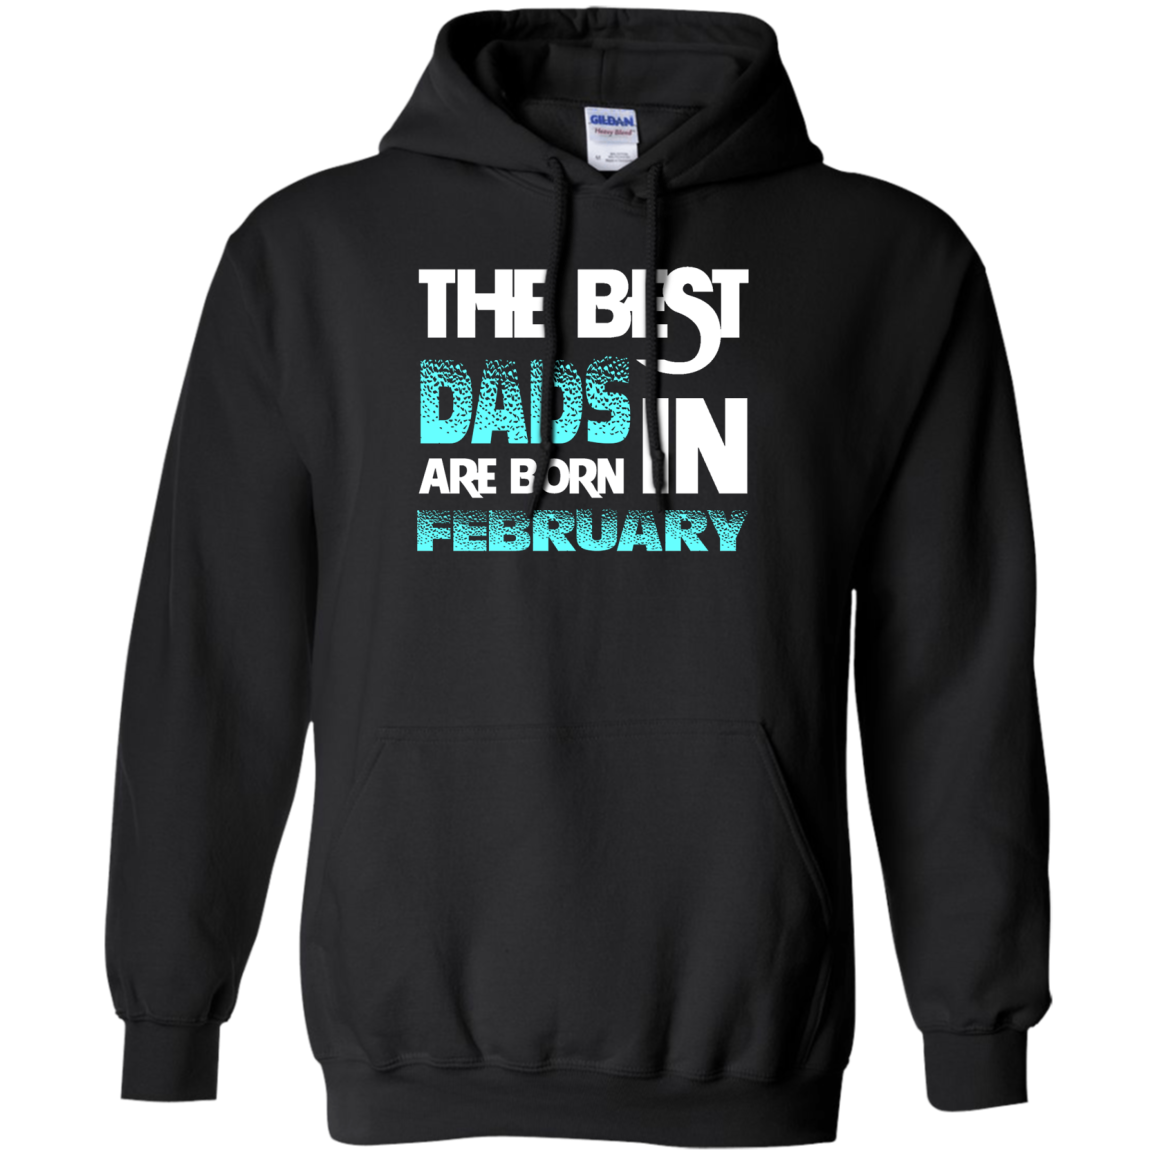 Daddy T-shirt The Best Dads Are Born In February